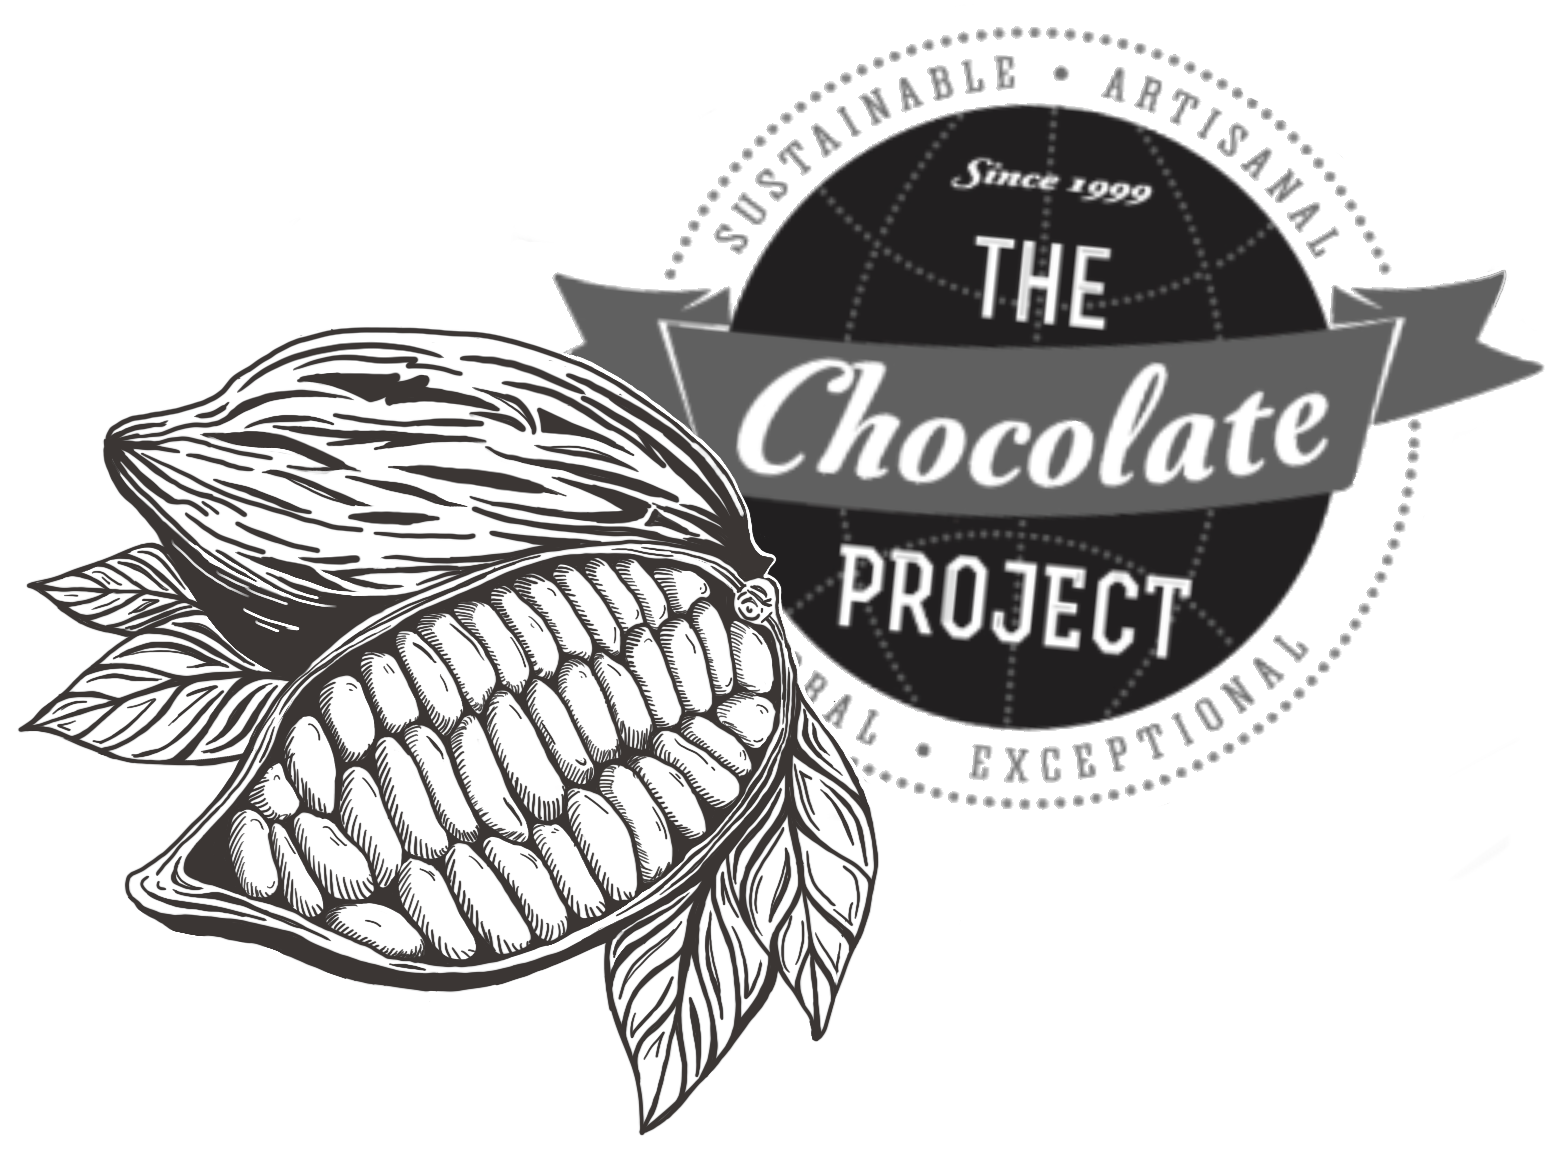 The Chocolate Project